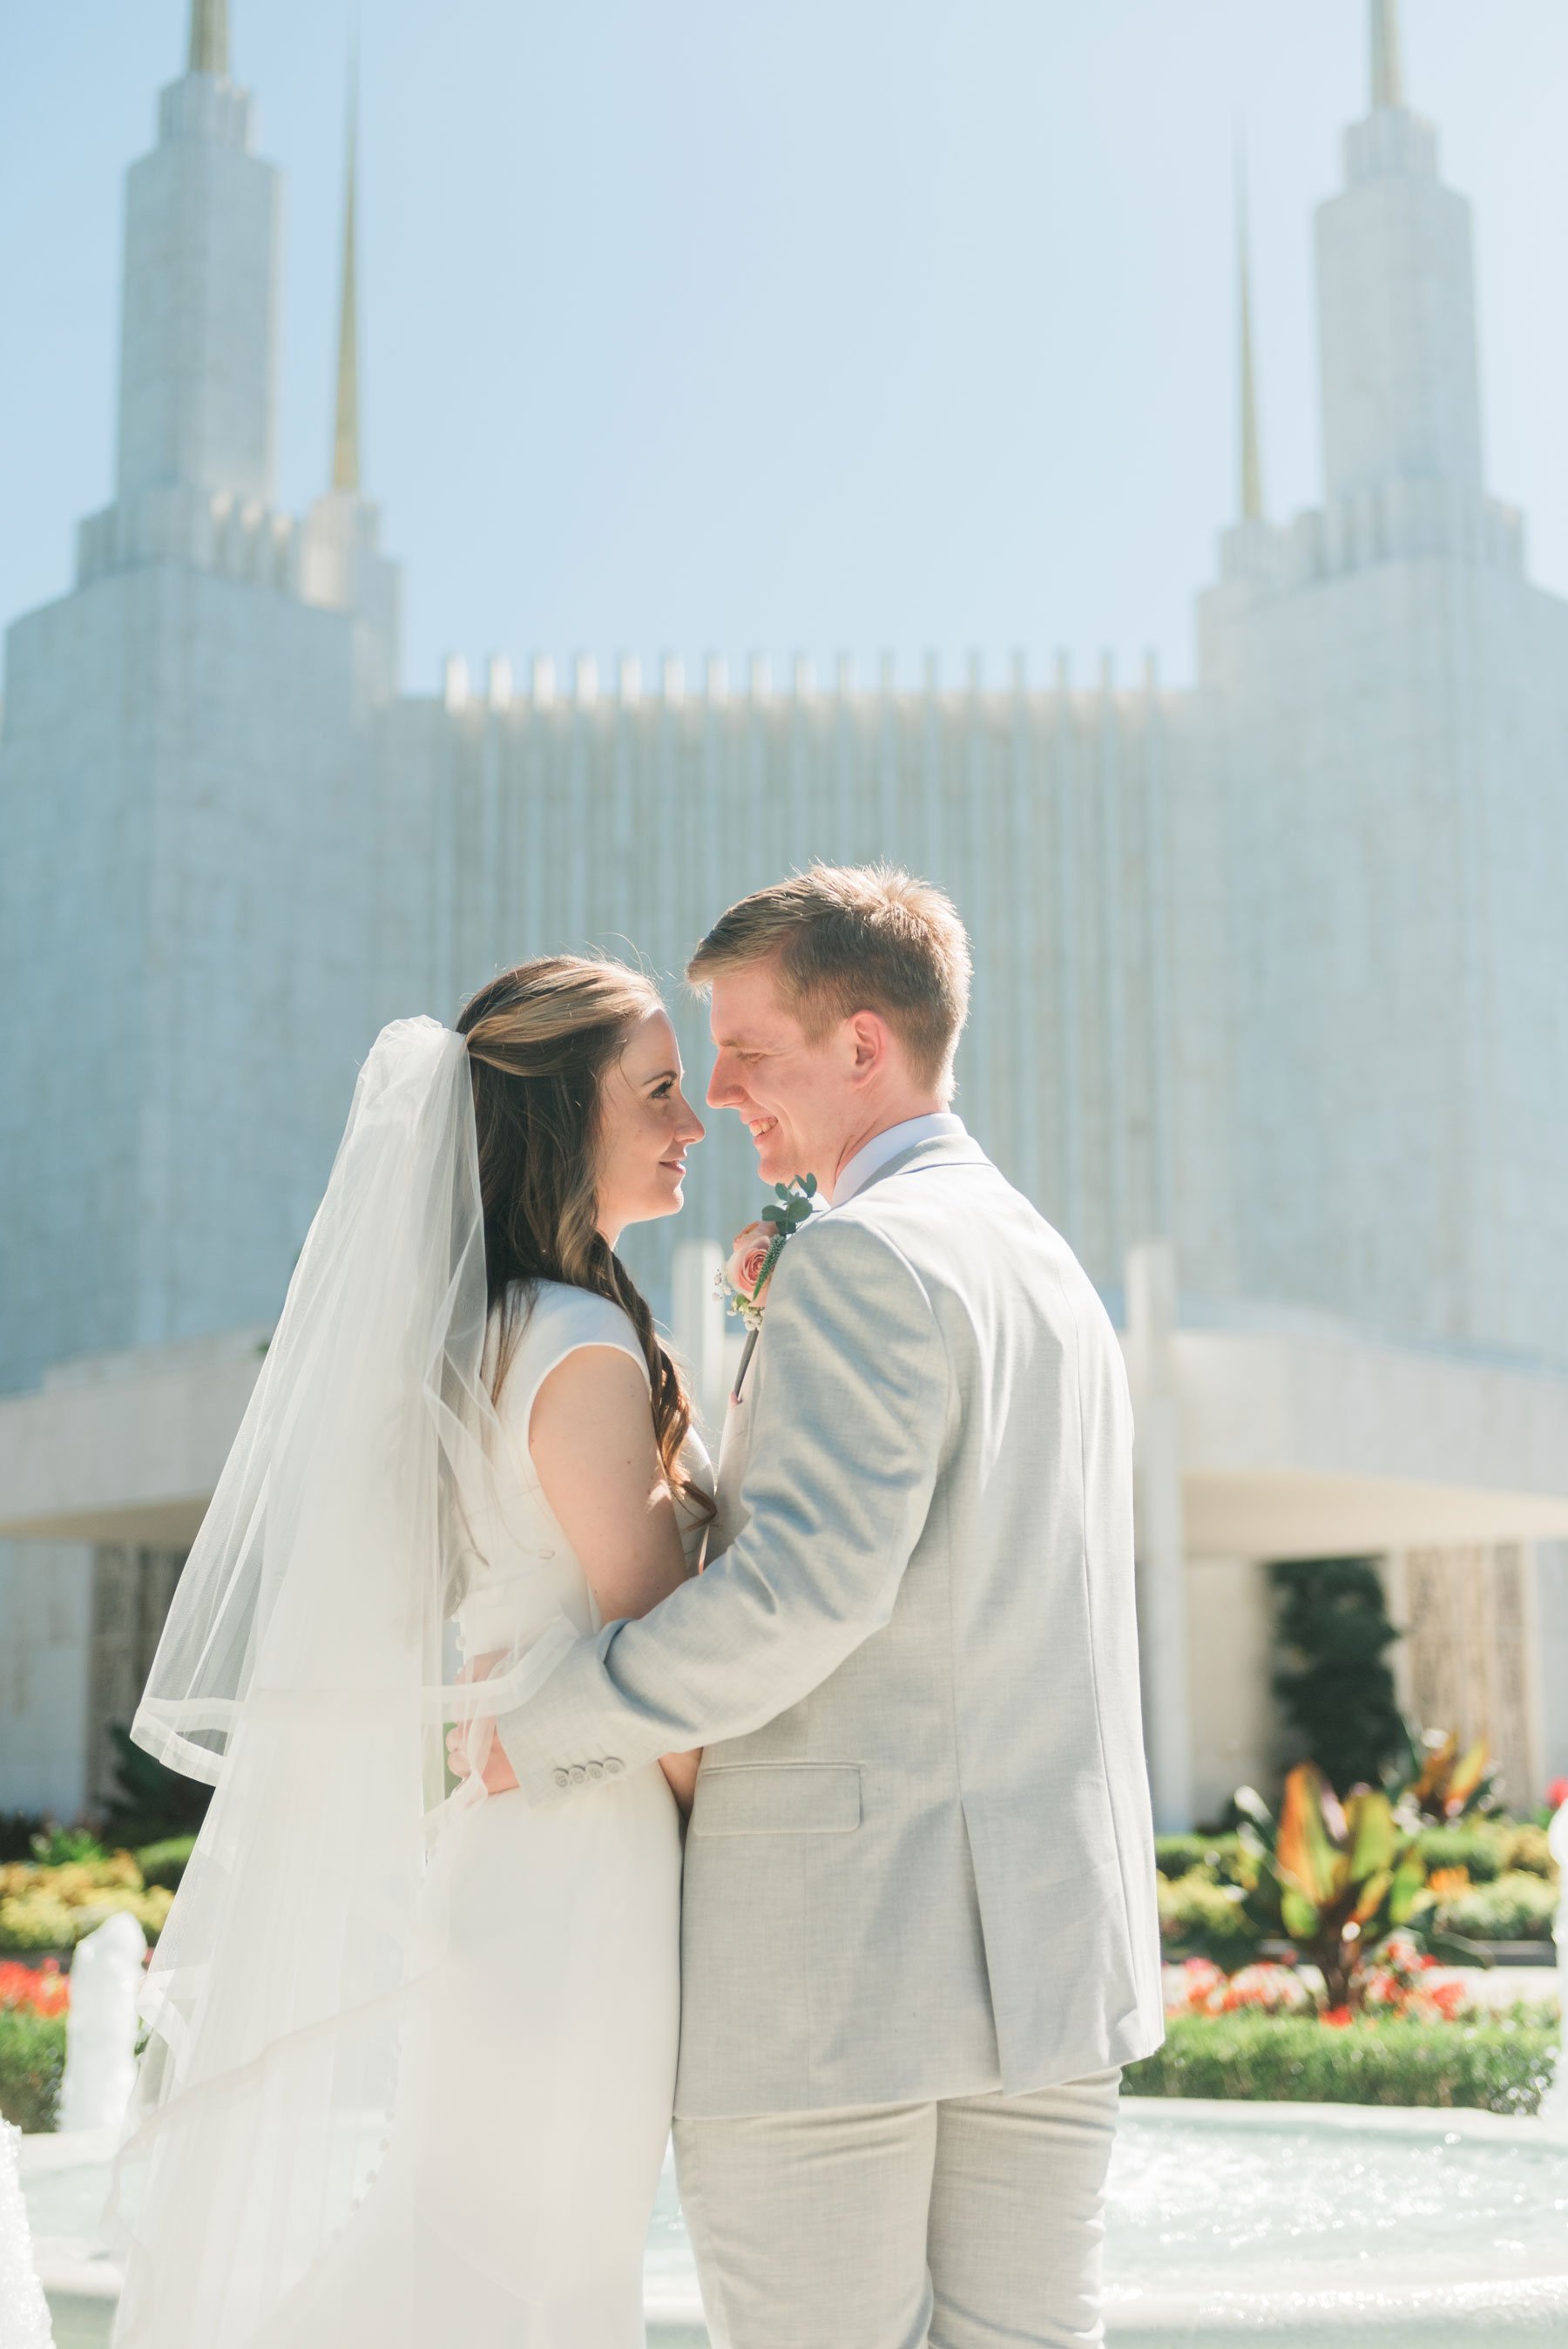    This beautiful portrait in front of the washington d.c. temple should be displayed in a gallery wall. #washingtondctemple #washingtondcweddingphotographer #dcwedding #pinkwedding #ldsweddingphotographer #pinkweddingbouquet #washingtondctempleexit 